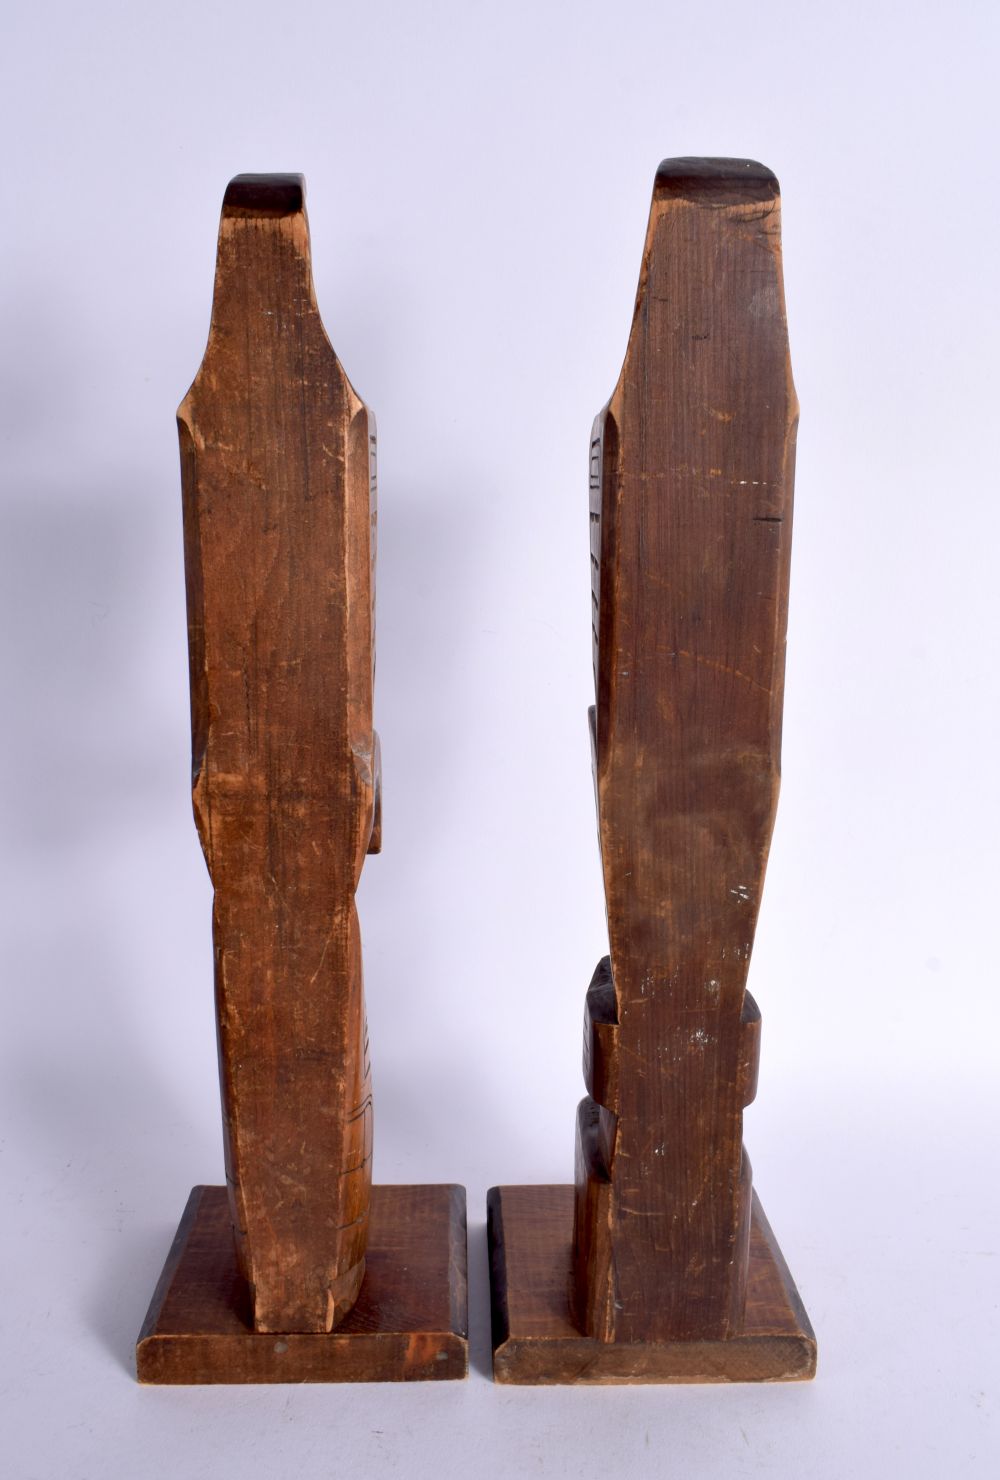 A LARGE PAIR OF NORTH AMERICAN CORMORANT ISLAND ALERT BAY HAIDA FIGURES modelled upon a rectangular - Image 3 of 3